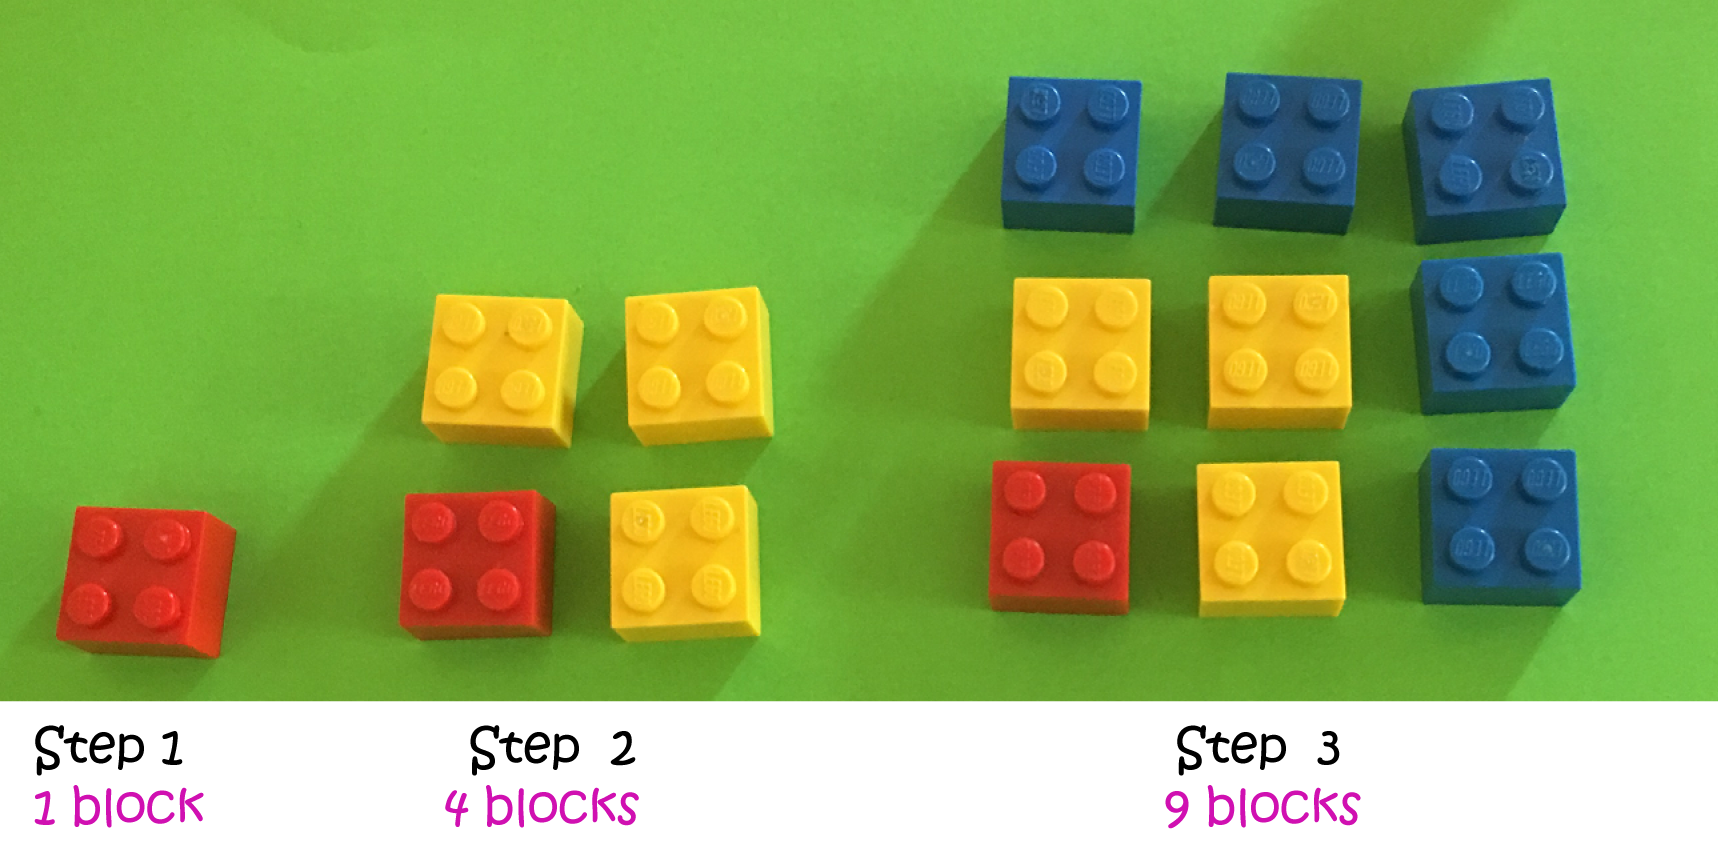 Building Your Own Number Patterns?